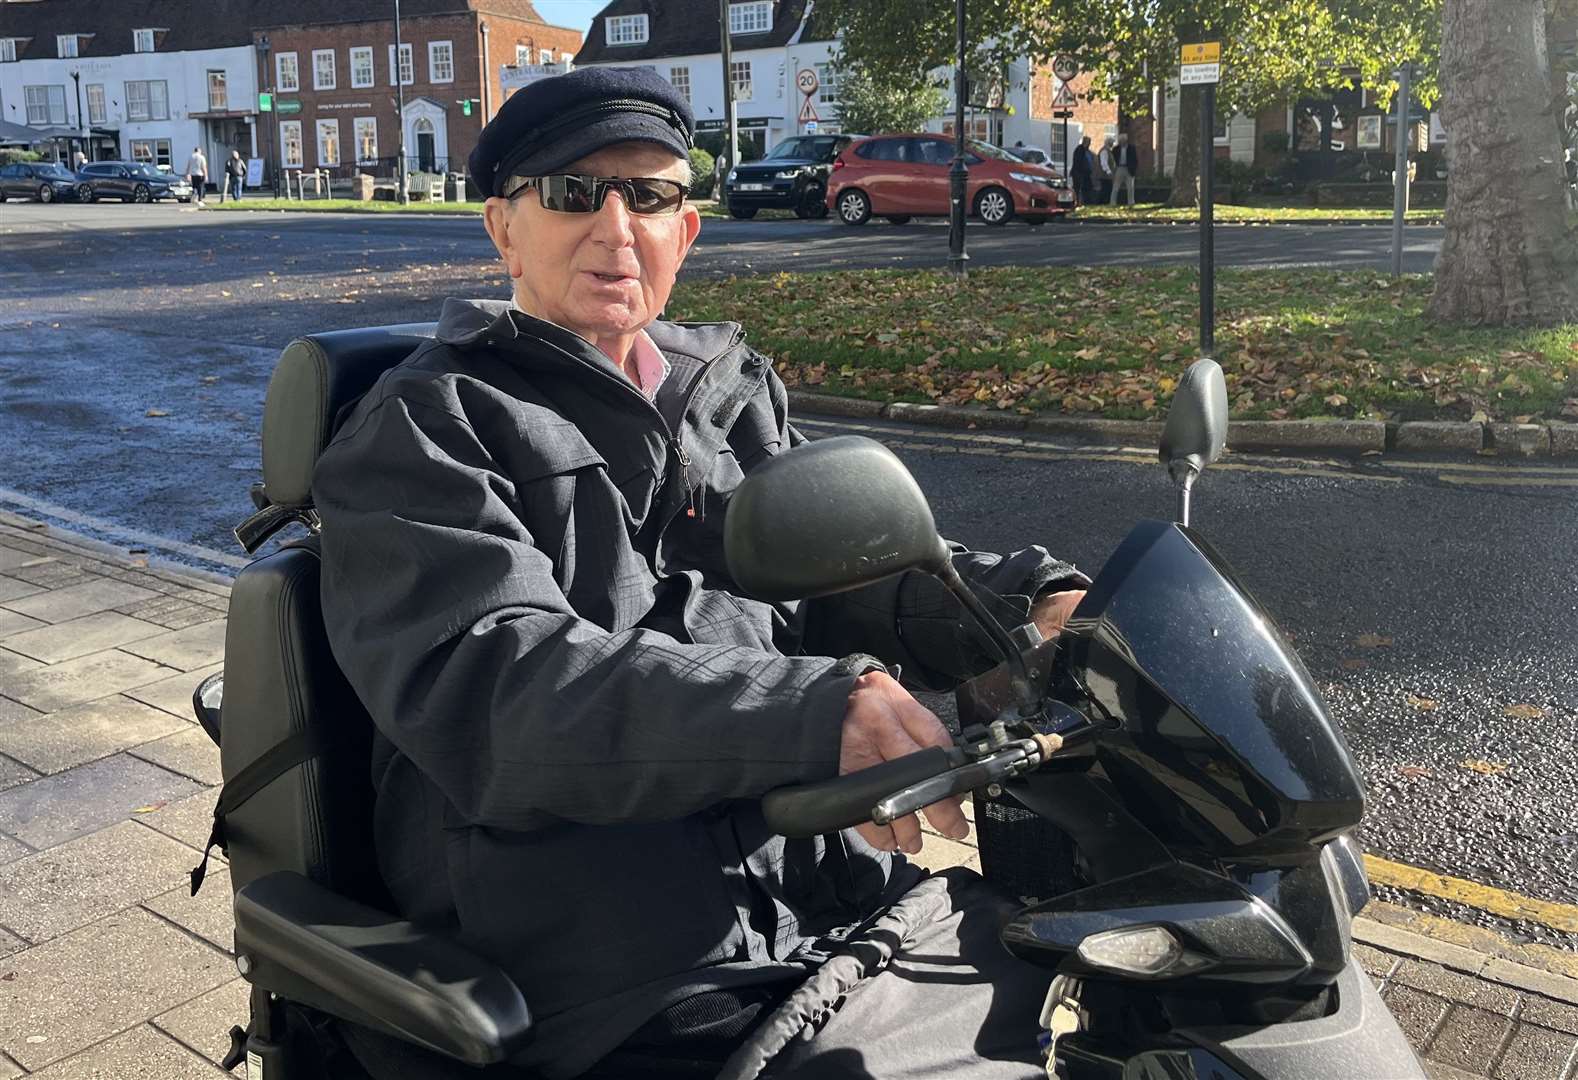 Peter Lake says he never has a smooth ride when travelling around Tenterden high street